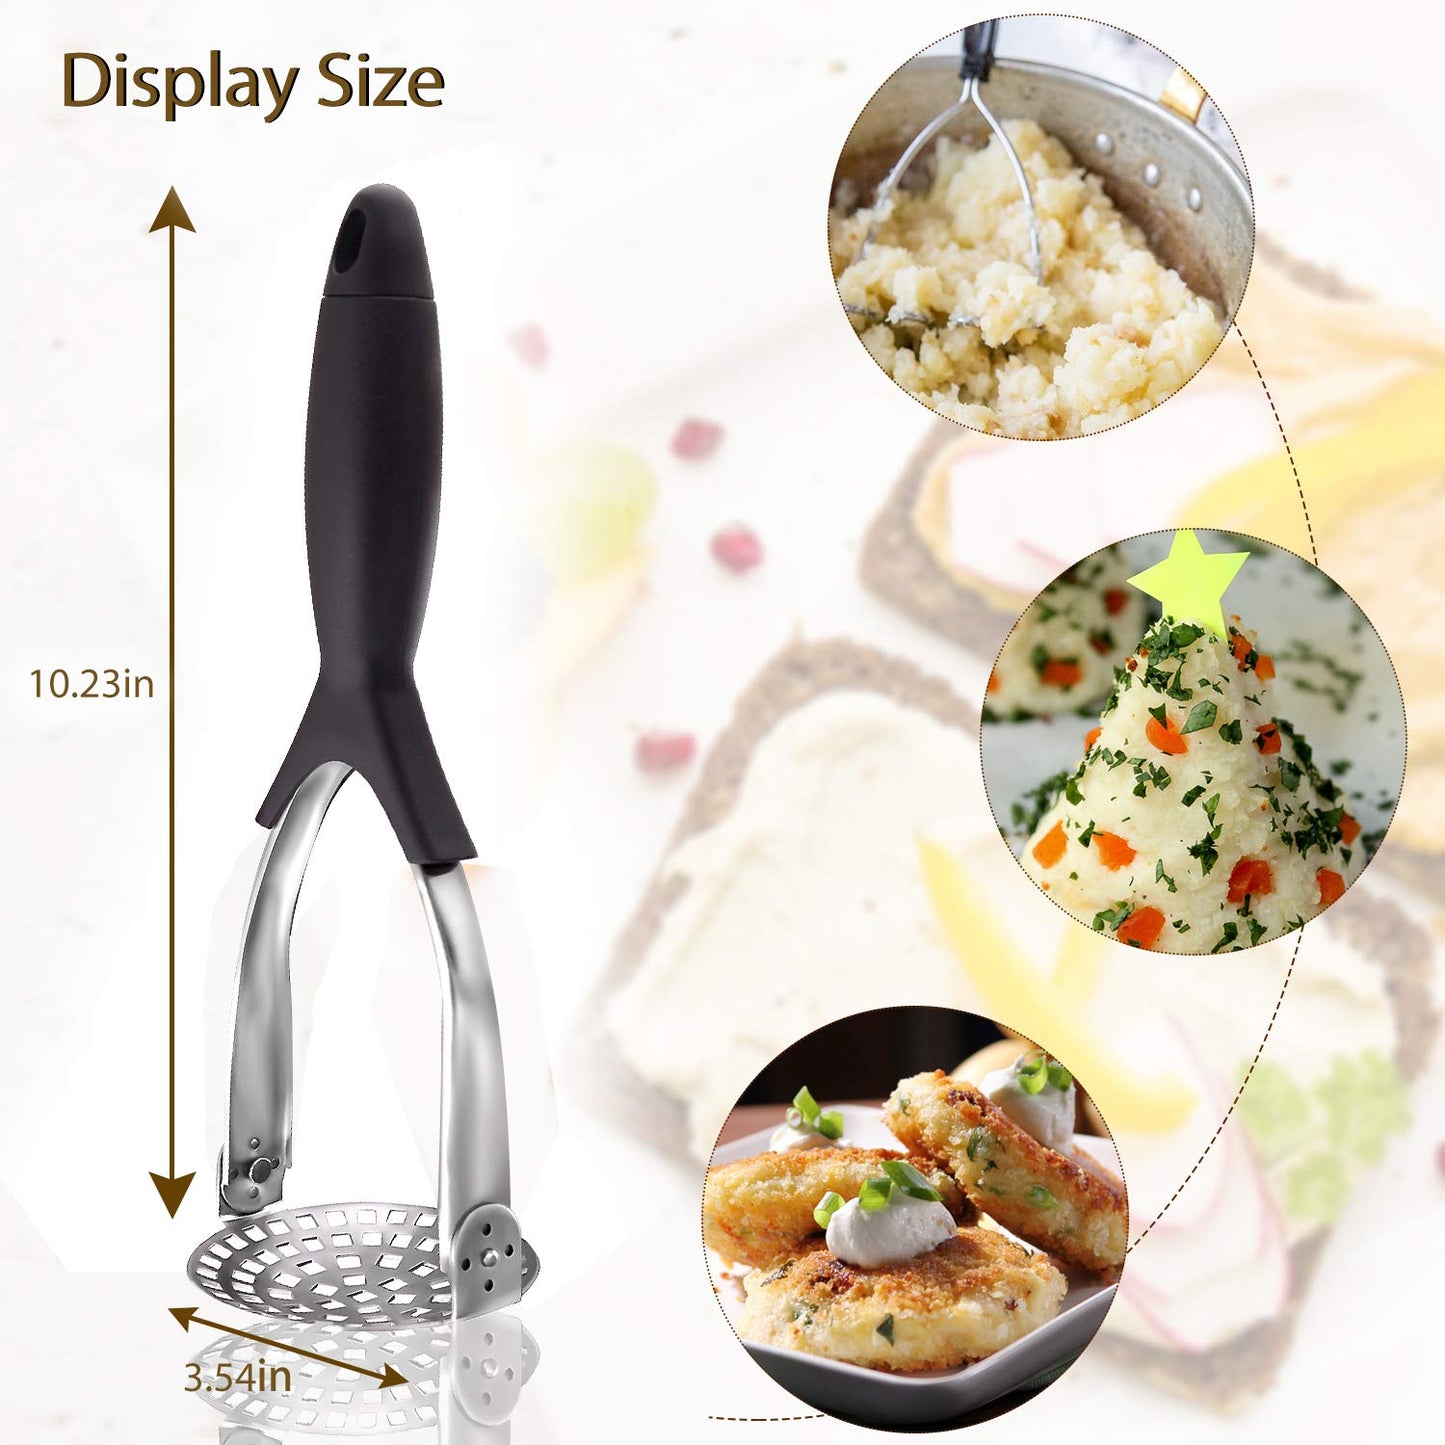 Heavy Duty Potato Masher, Stainless Steel Hand Potato Smasher for Beans, Vegetables, Avocado, Food and Friut